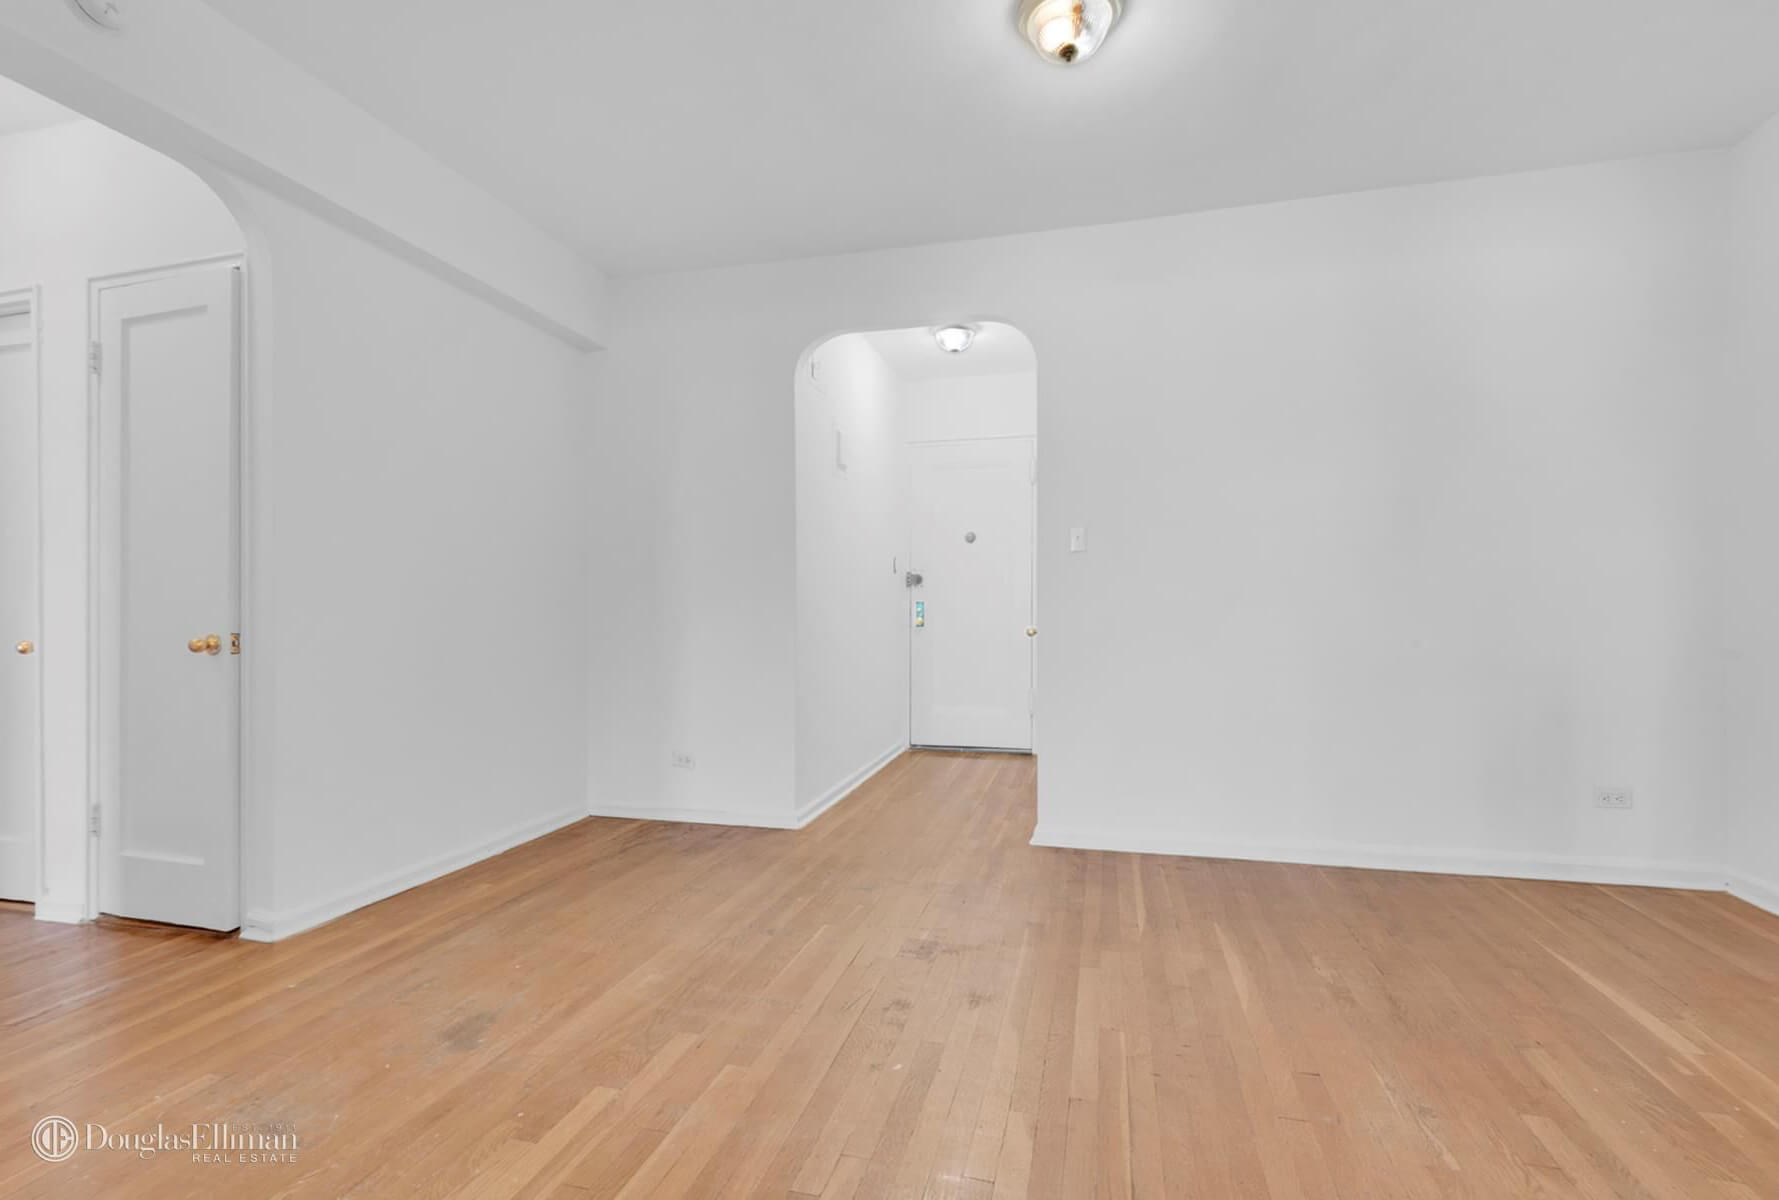 entry and living room of 1350 ocean parkway apt 4e